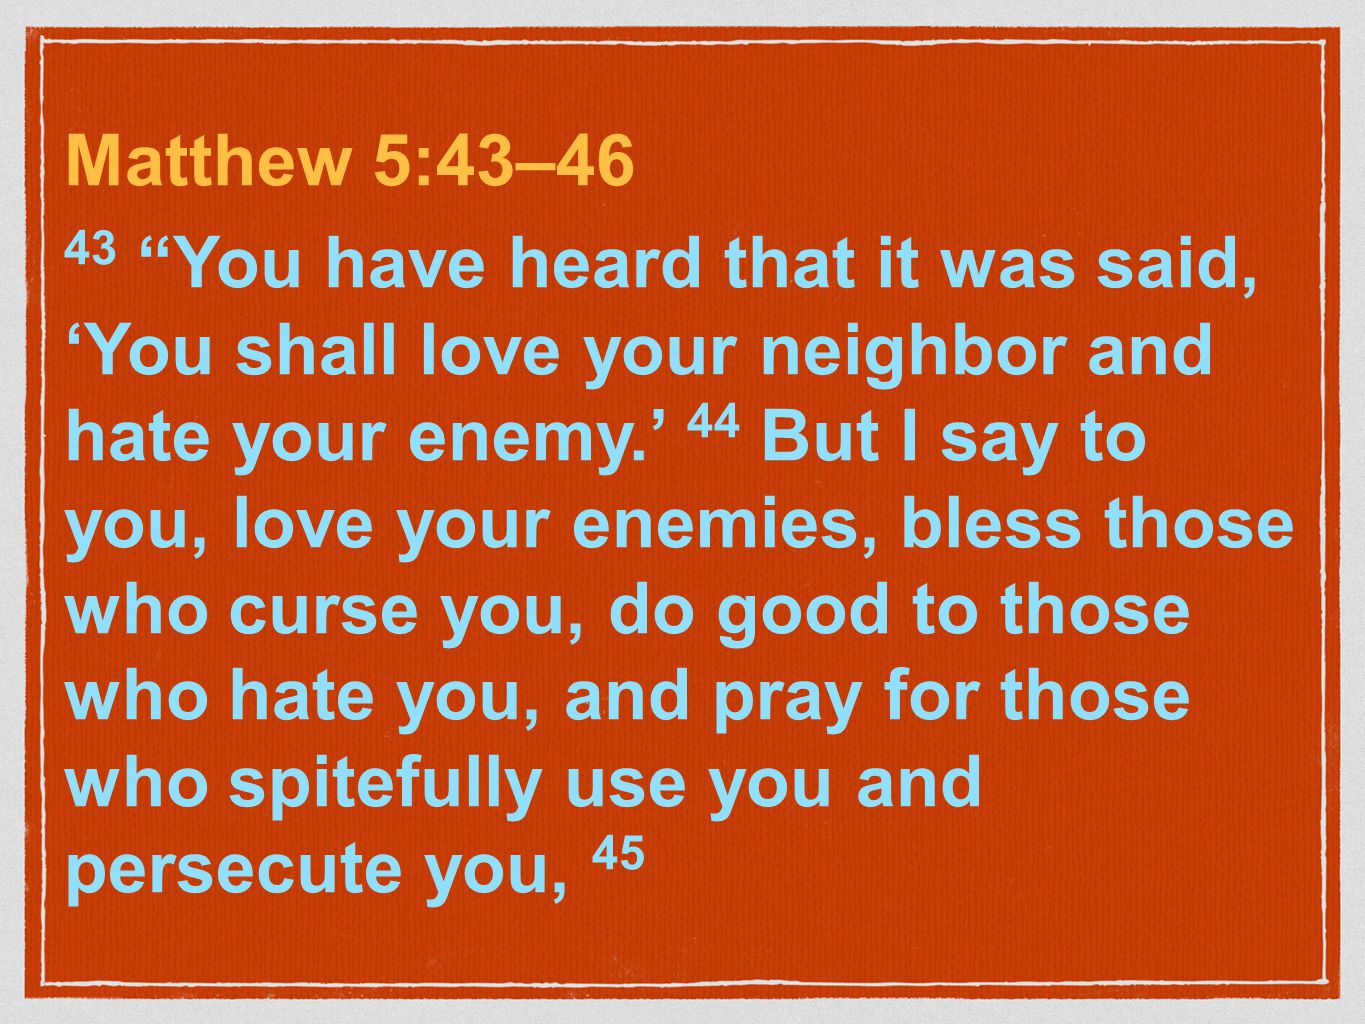 Matthew 5:43–46 43 You have heard that it was said, ‘You shall love your neighbor and hate your enemy.’ 44 But I say to you, love your enemies, bless those who curse you, do good to those who hate you, and pray for those who spitefully use you and persecute you, 45